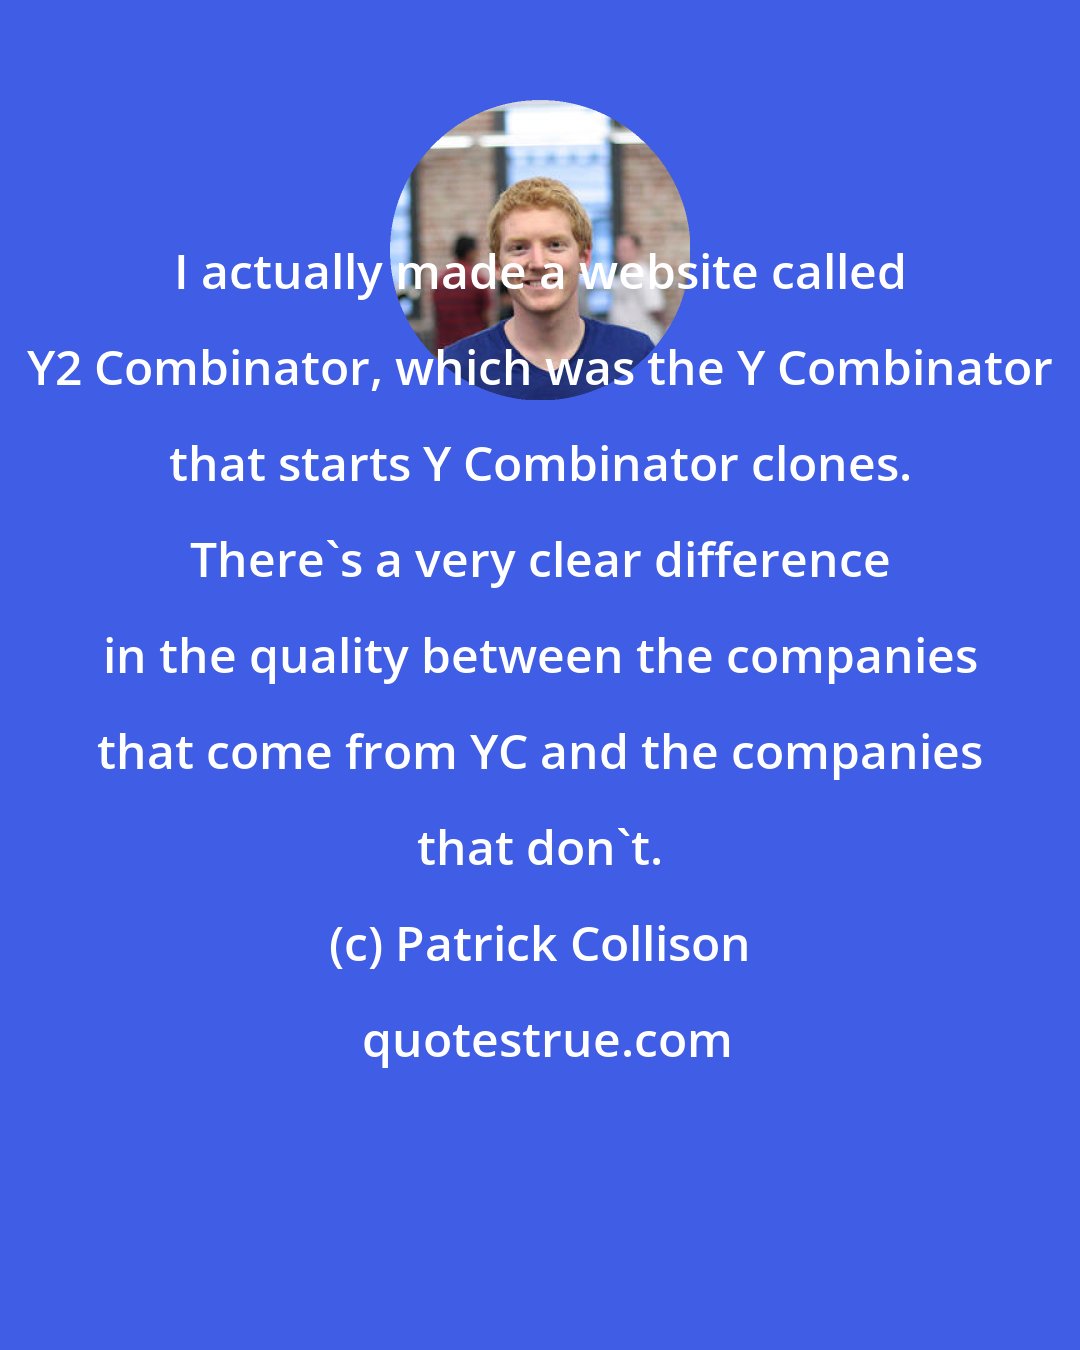 Patrick Collison: I actually made a website called Y2 Combinator, which was the Y Combinator that starts Y Combinator clones. There's a very clear difference in the quality between the companies that come from YC and the companies that don't.